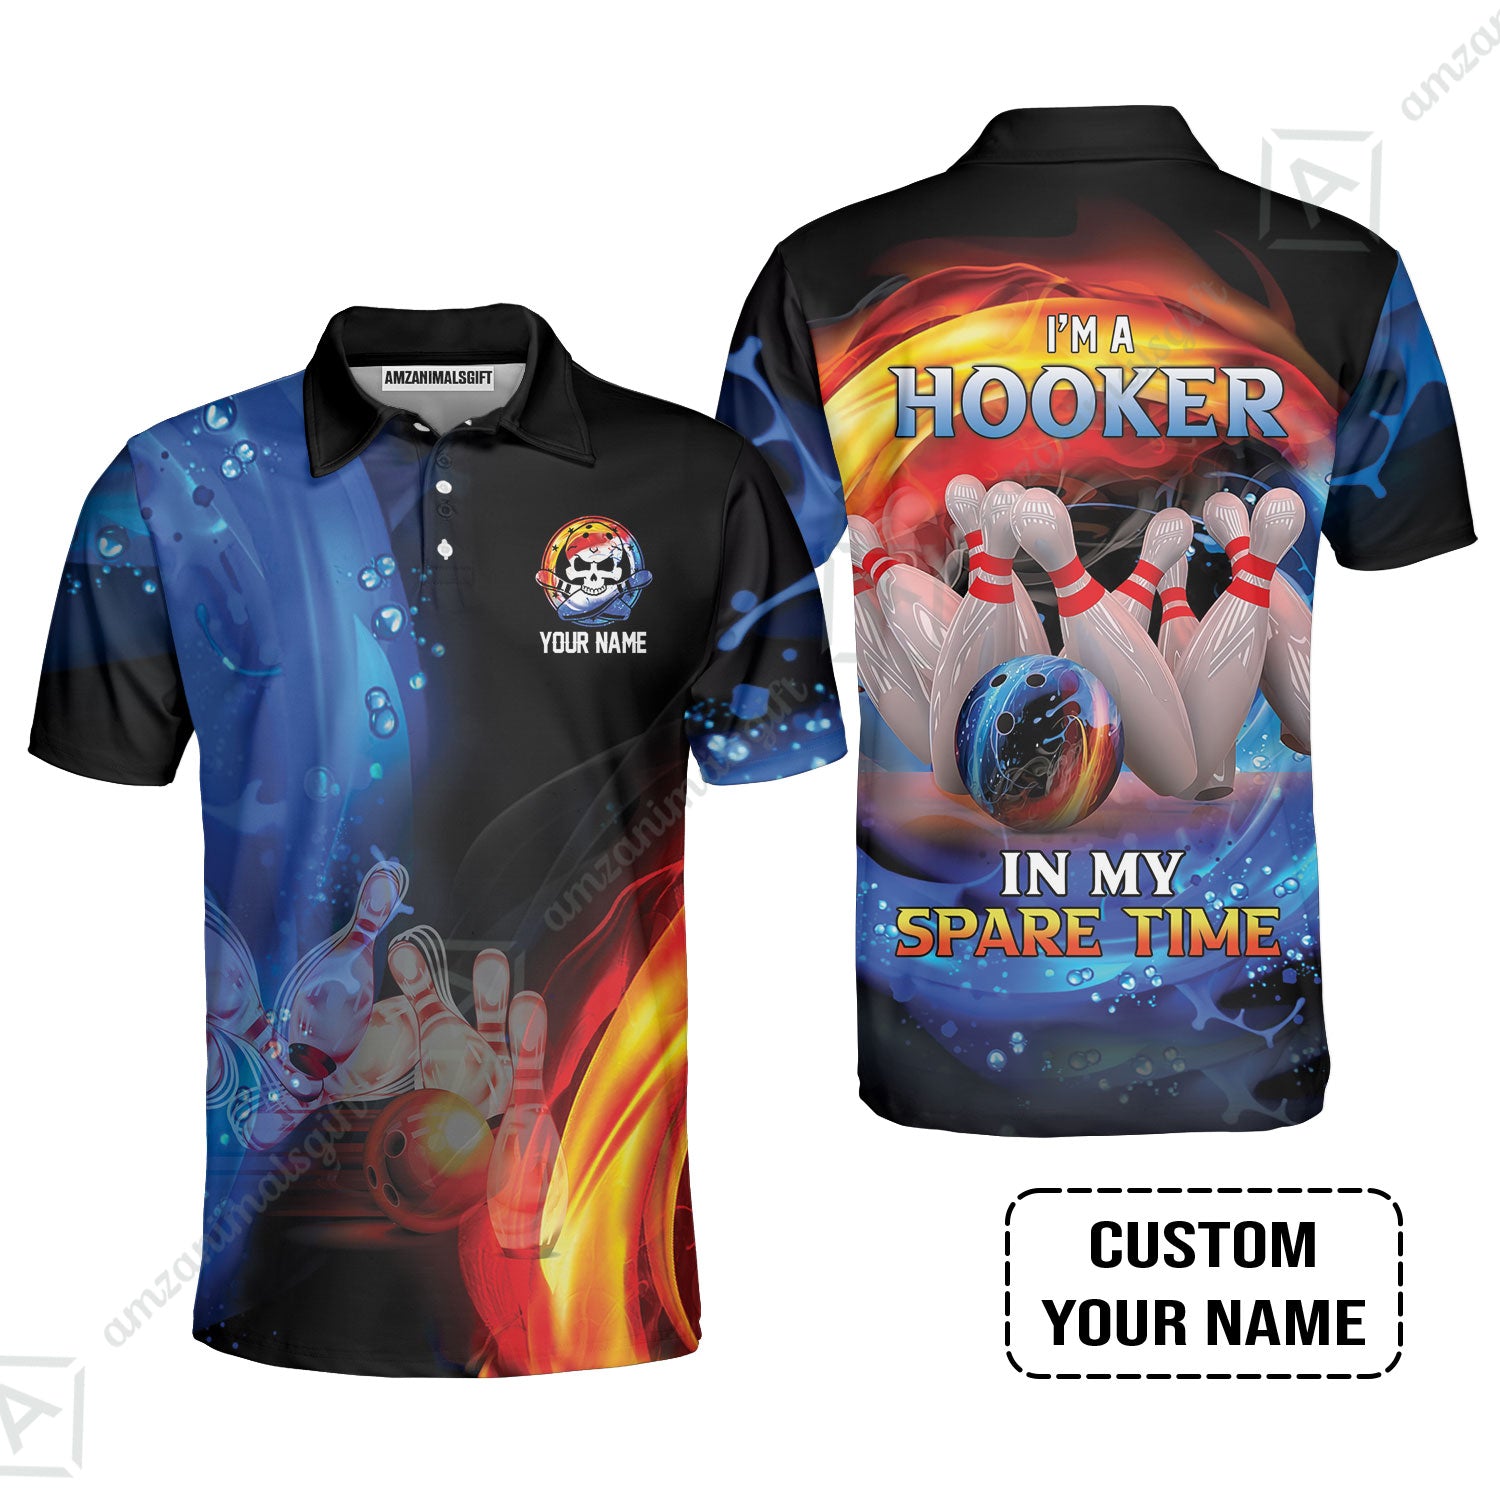 Customized Name Bowling Men Polo Shirts - Bowling I'm A Hooker In My Spare Time Personalized Polo Shirt